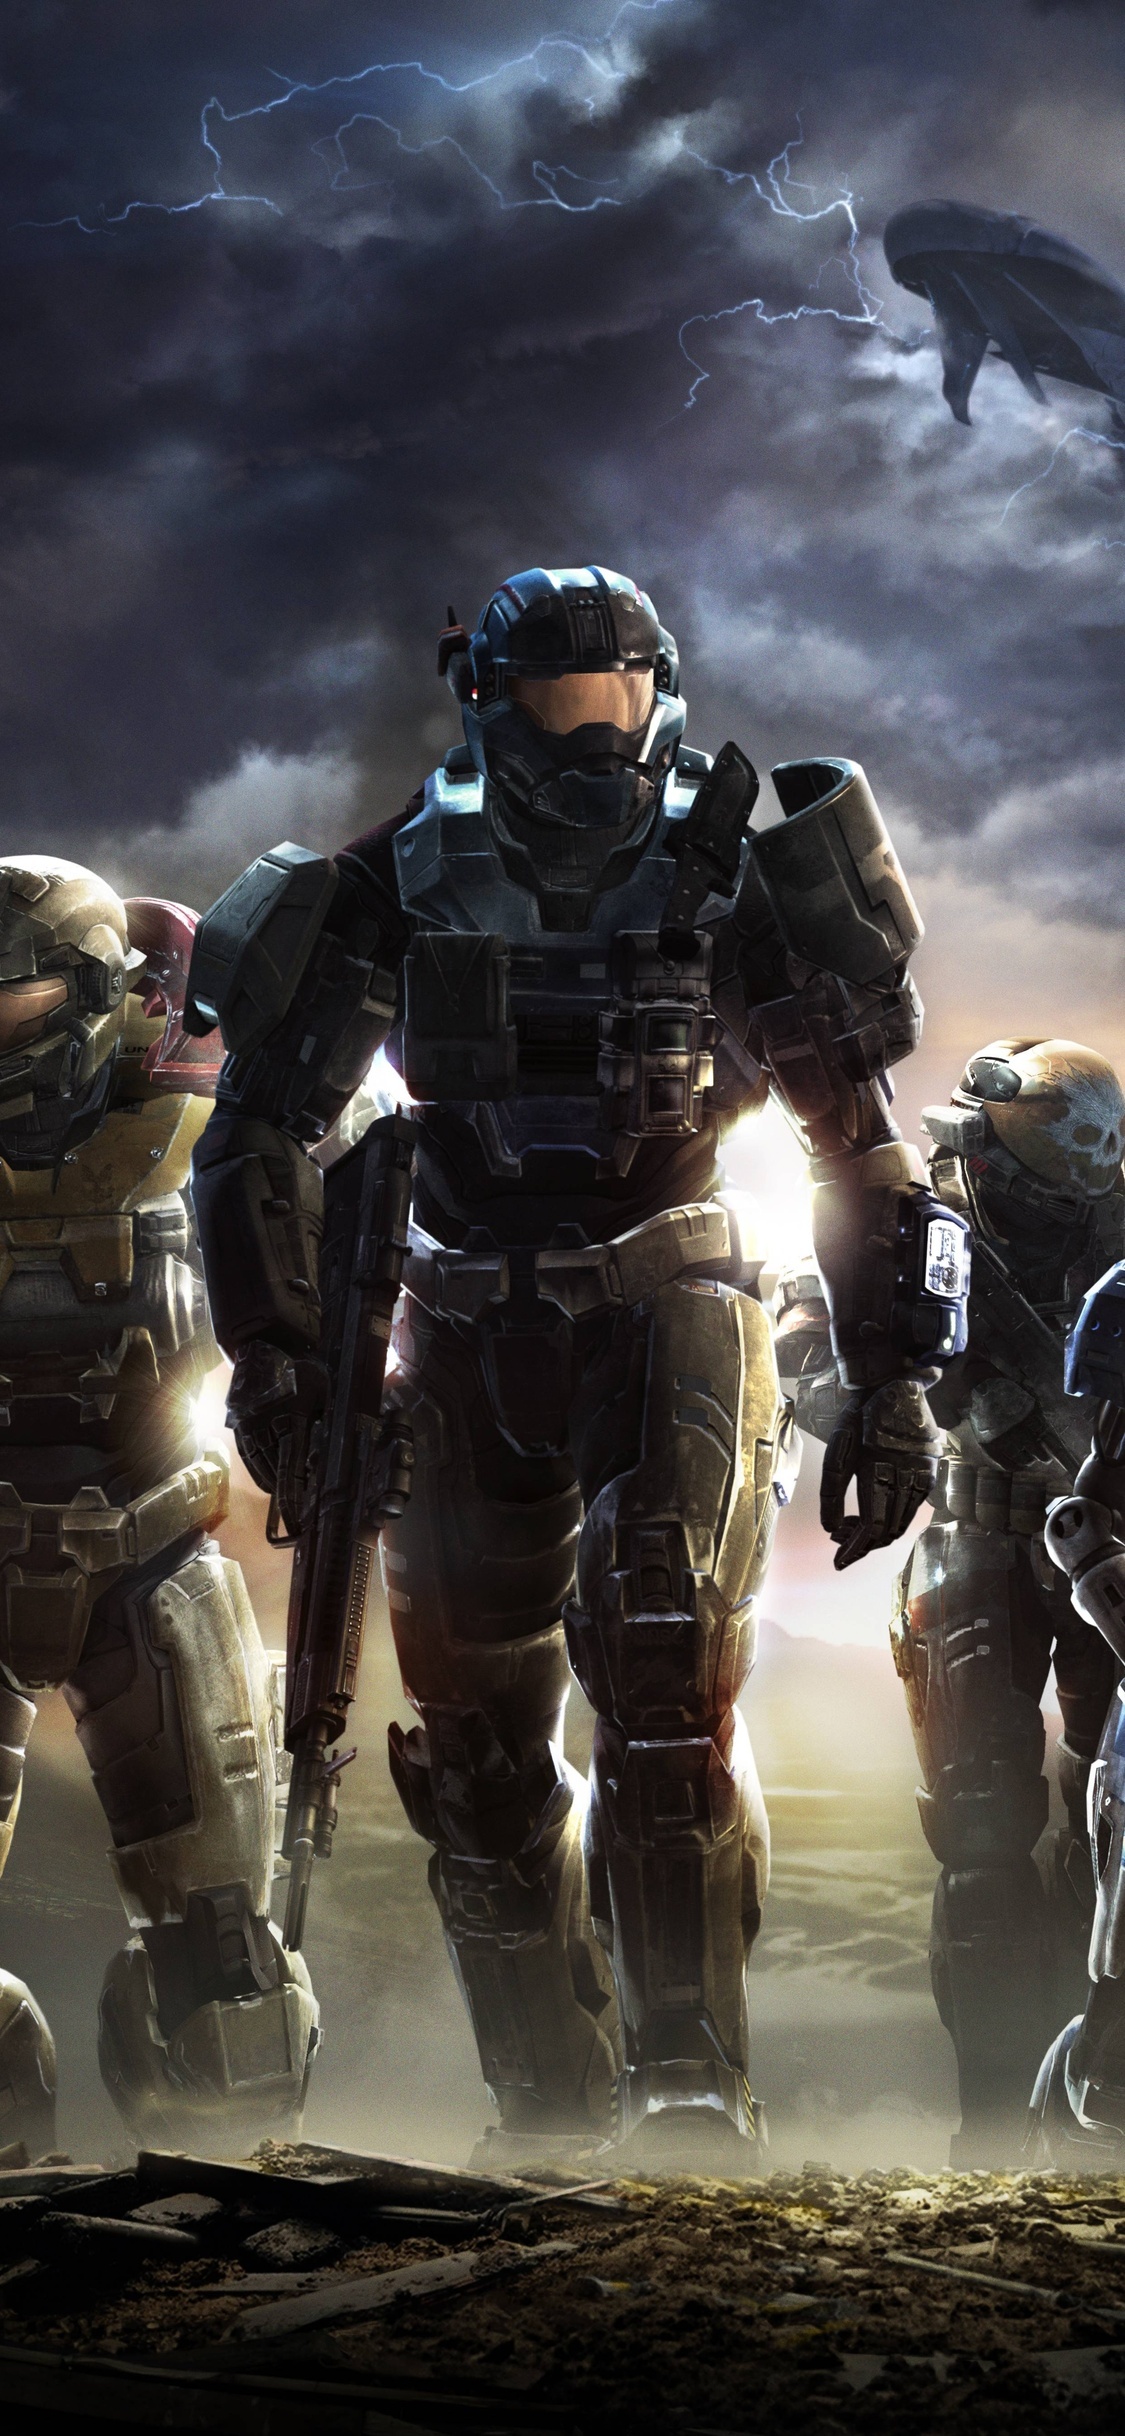 Halo: Reach gaming, iPhone wallpaper collection, Signature artstyle, Mobile customization, 1130x2440 HD Handy